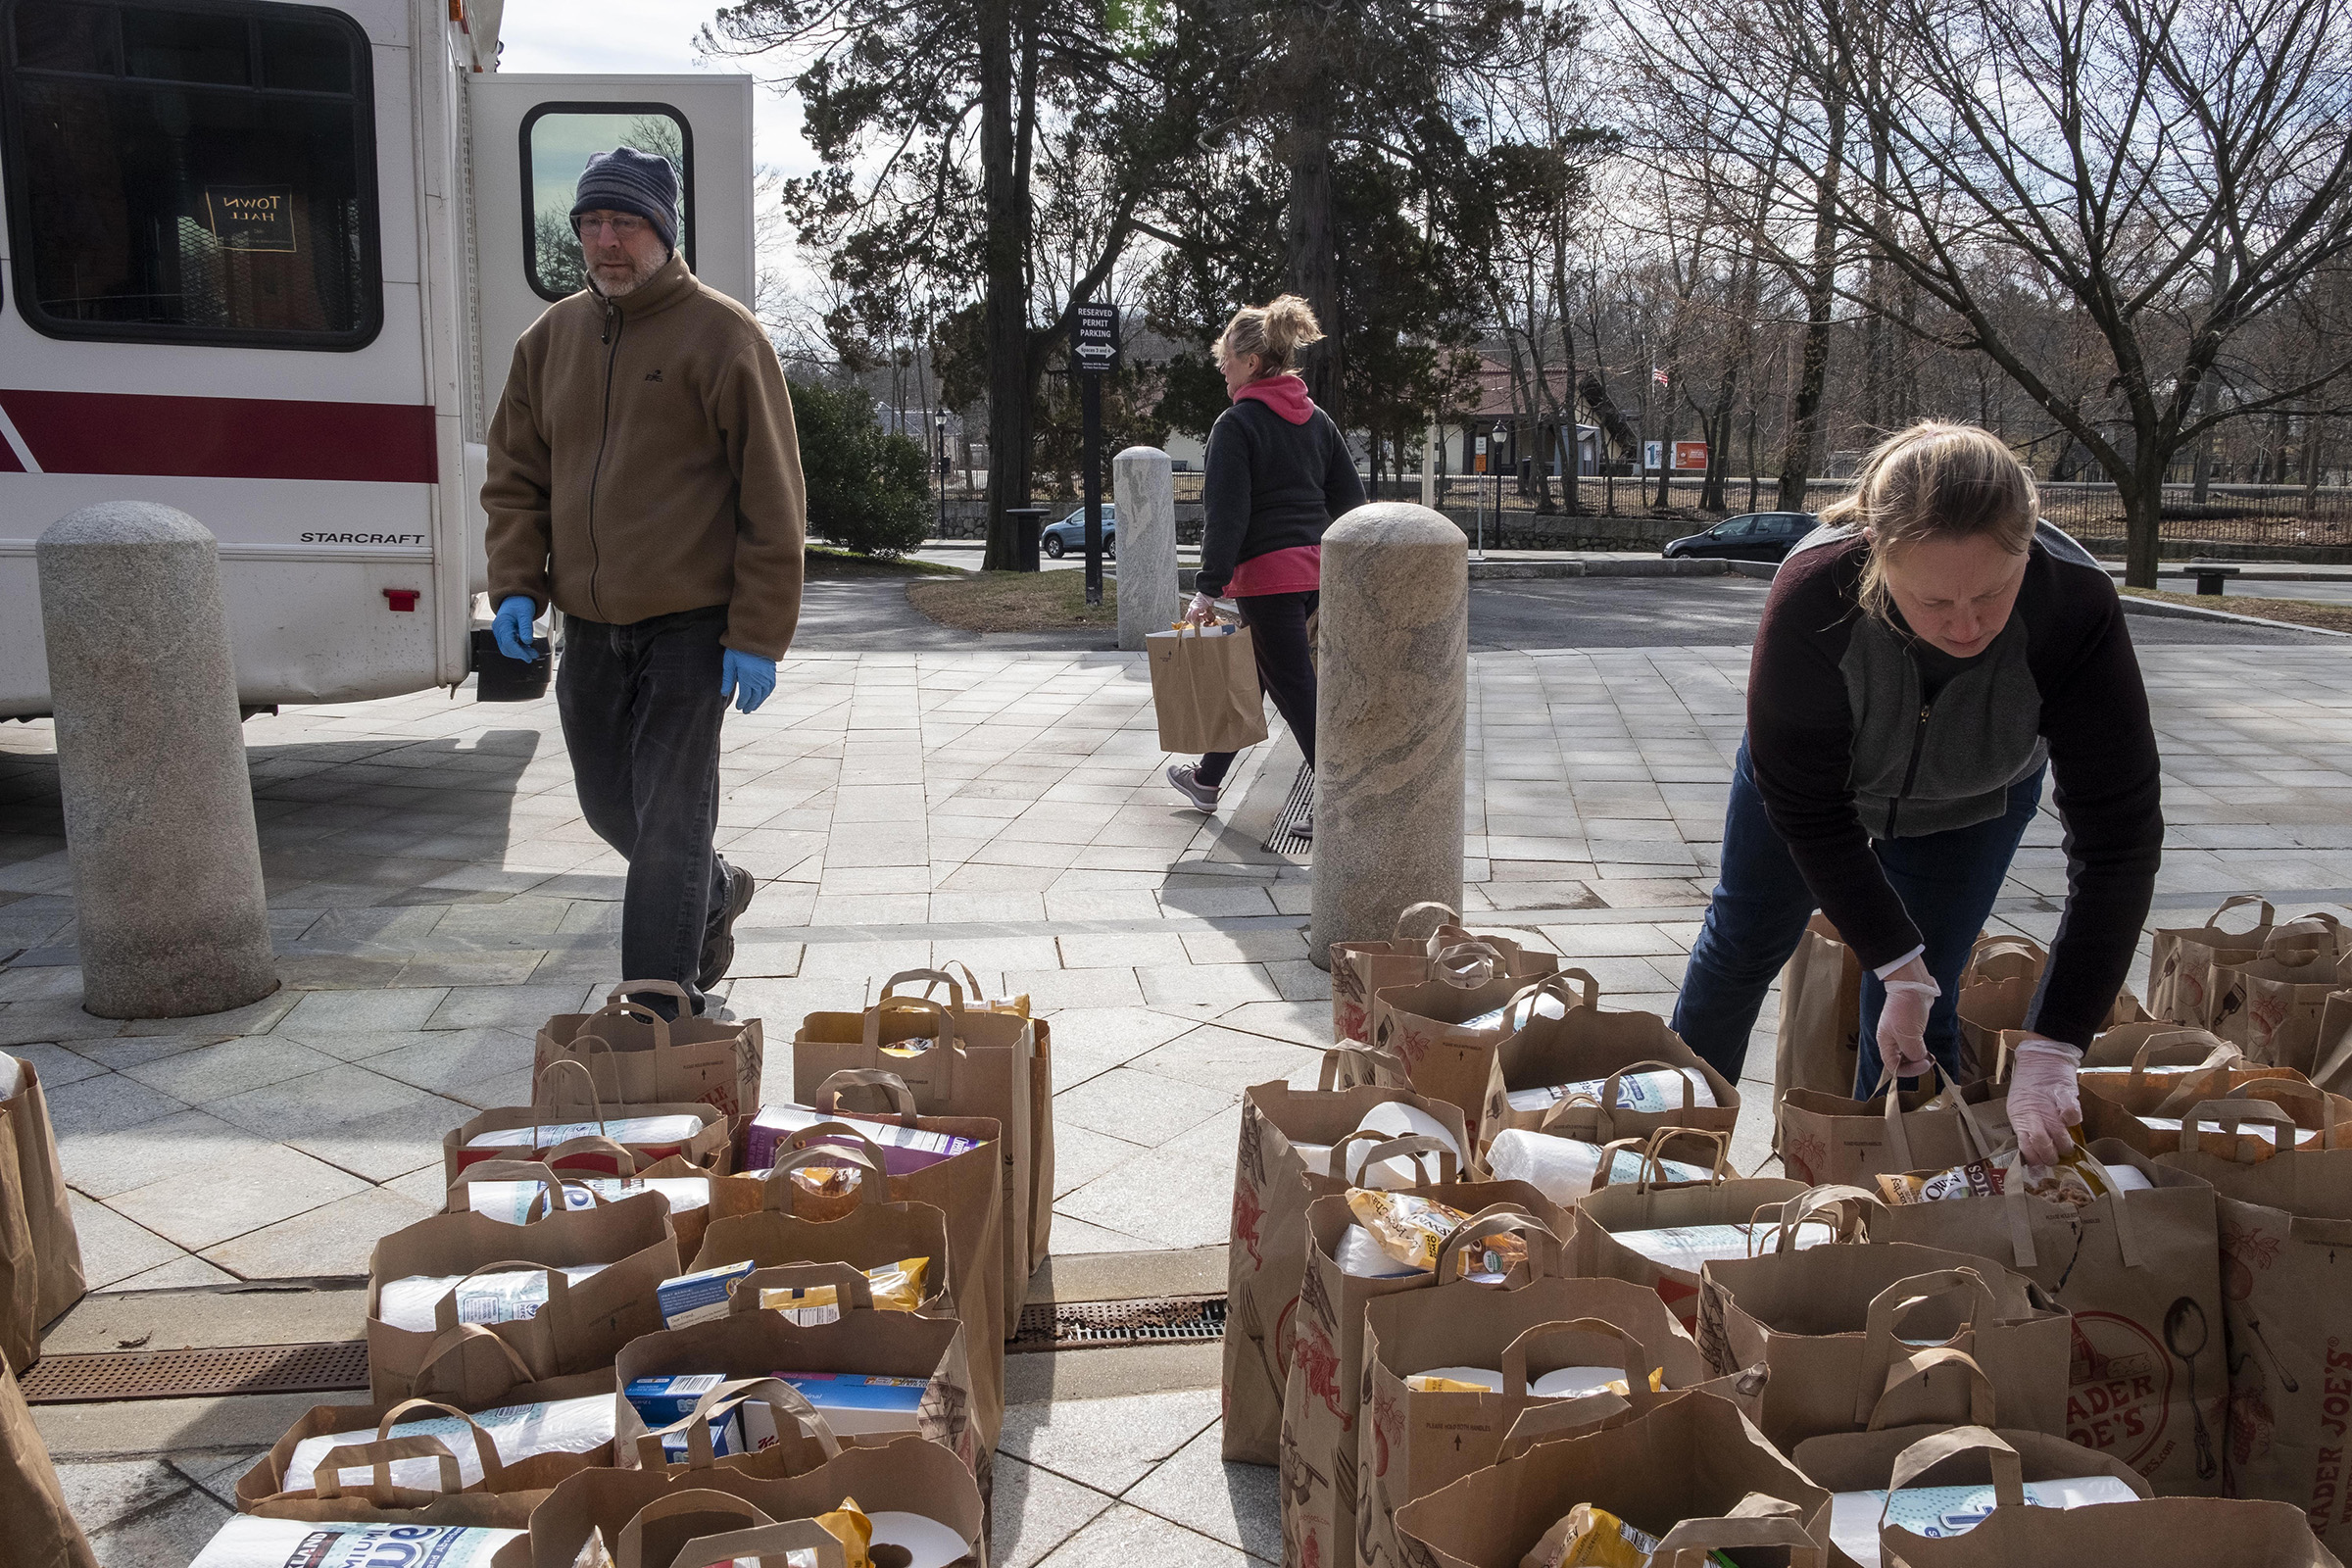 Volunteers move bags of nonperishable food and supplies into a Belmont Council on Aging bus as part of distribution to senior citizens in need in Belmont, Mass. (M. Scott Brauer—Redux)